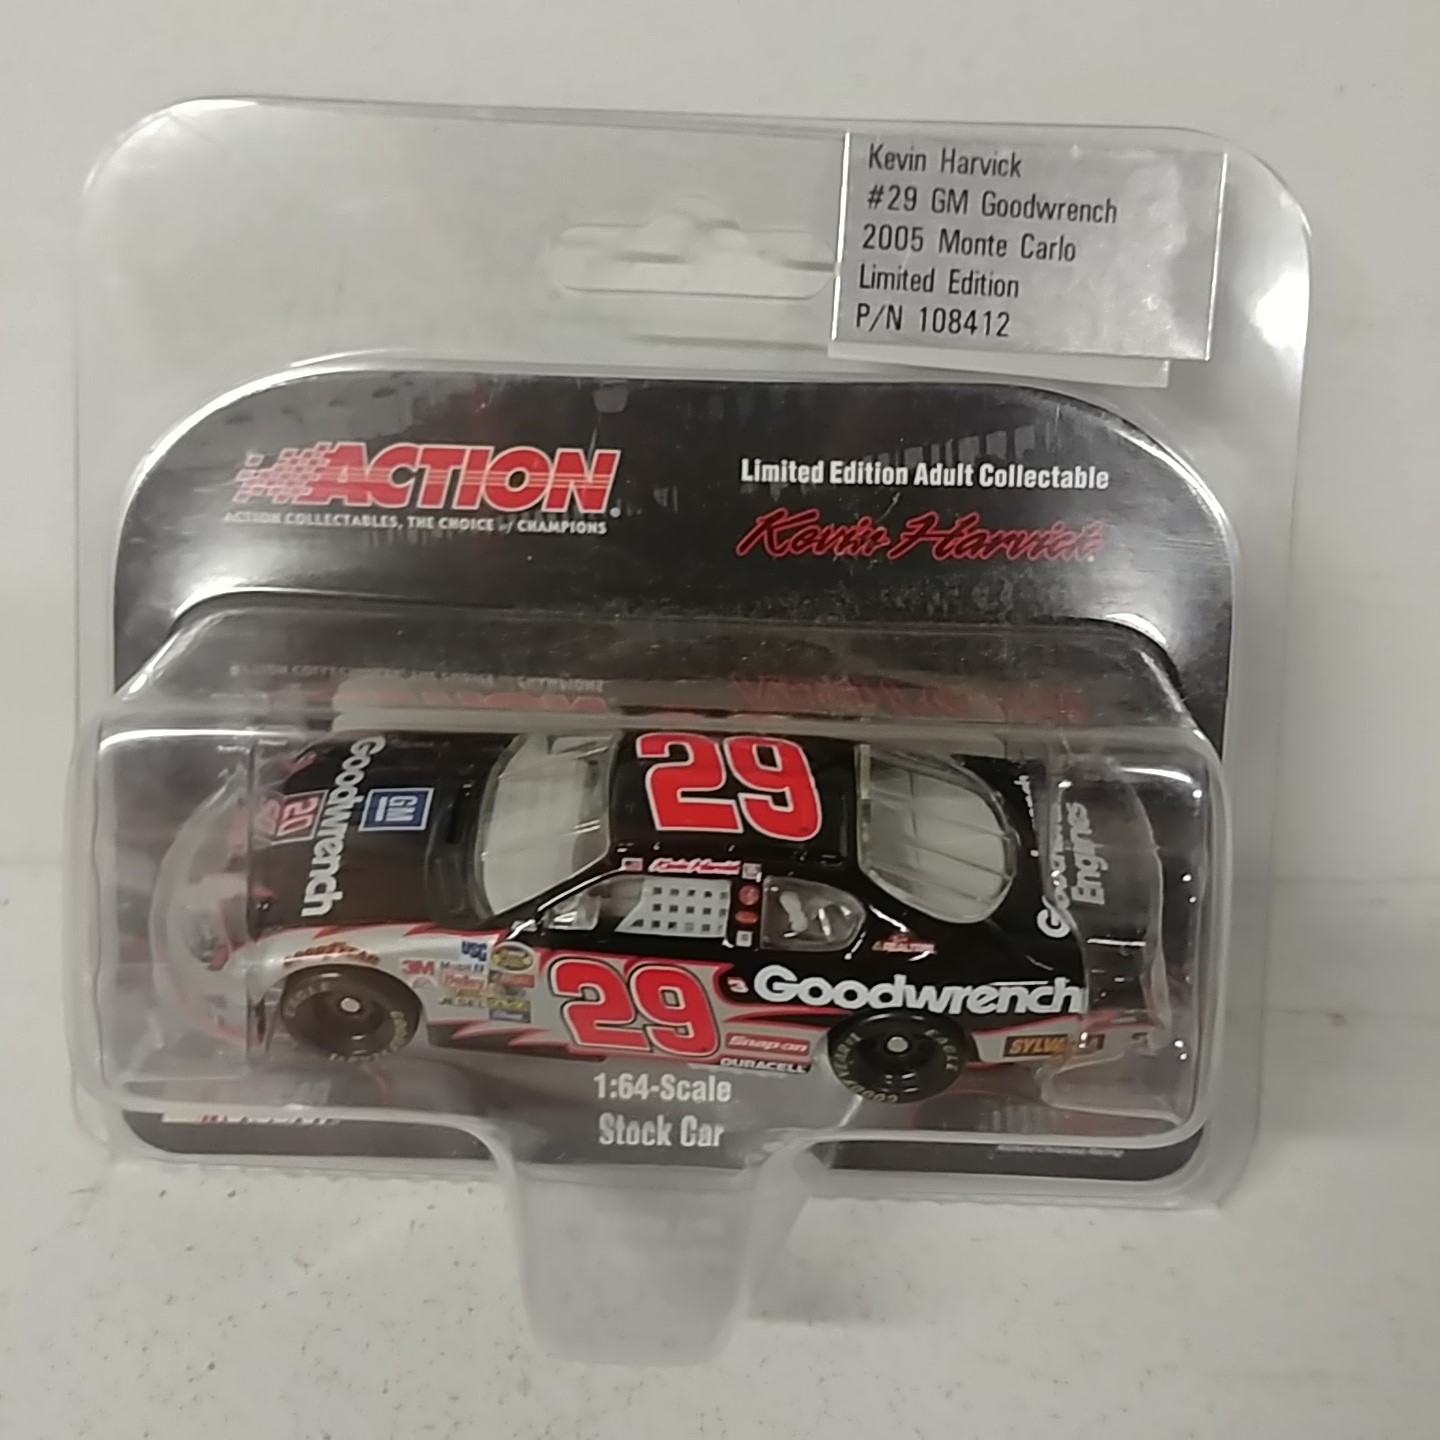 2005 Kevin Harvick 1/64th GM Goodwrench AP car